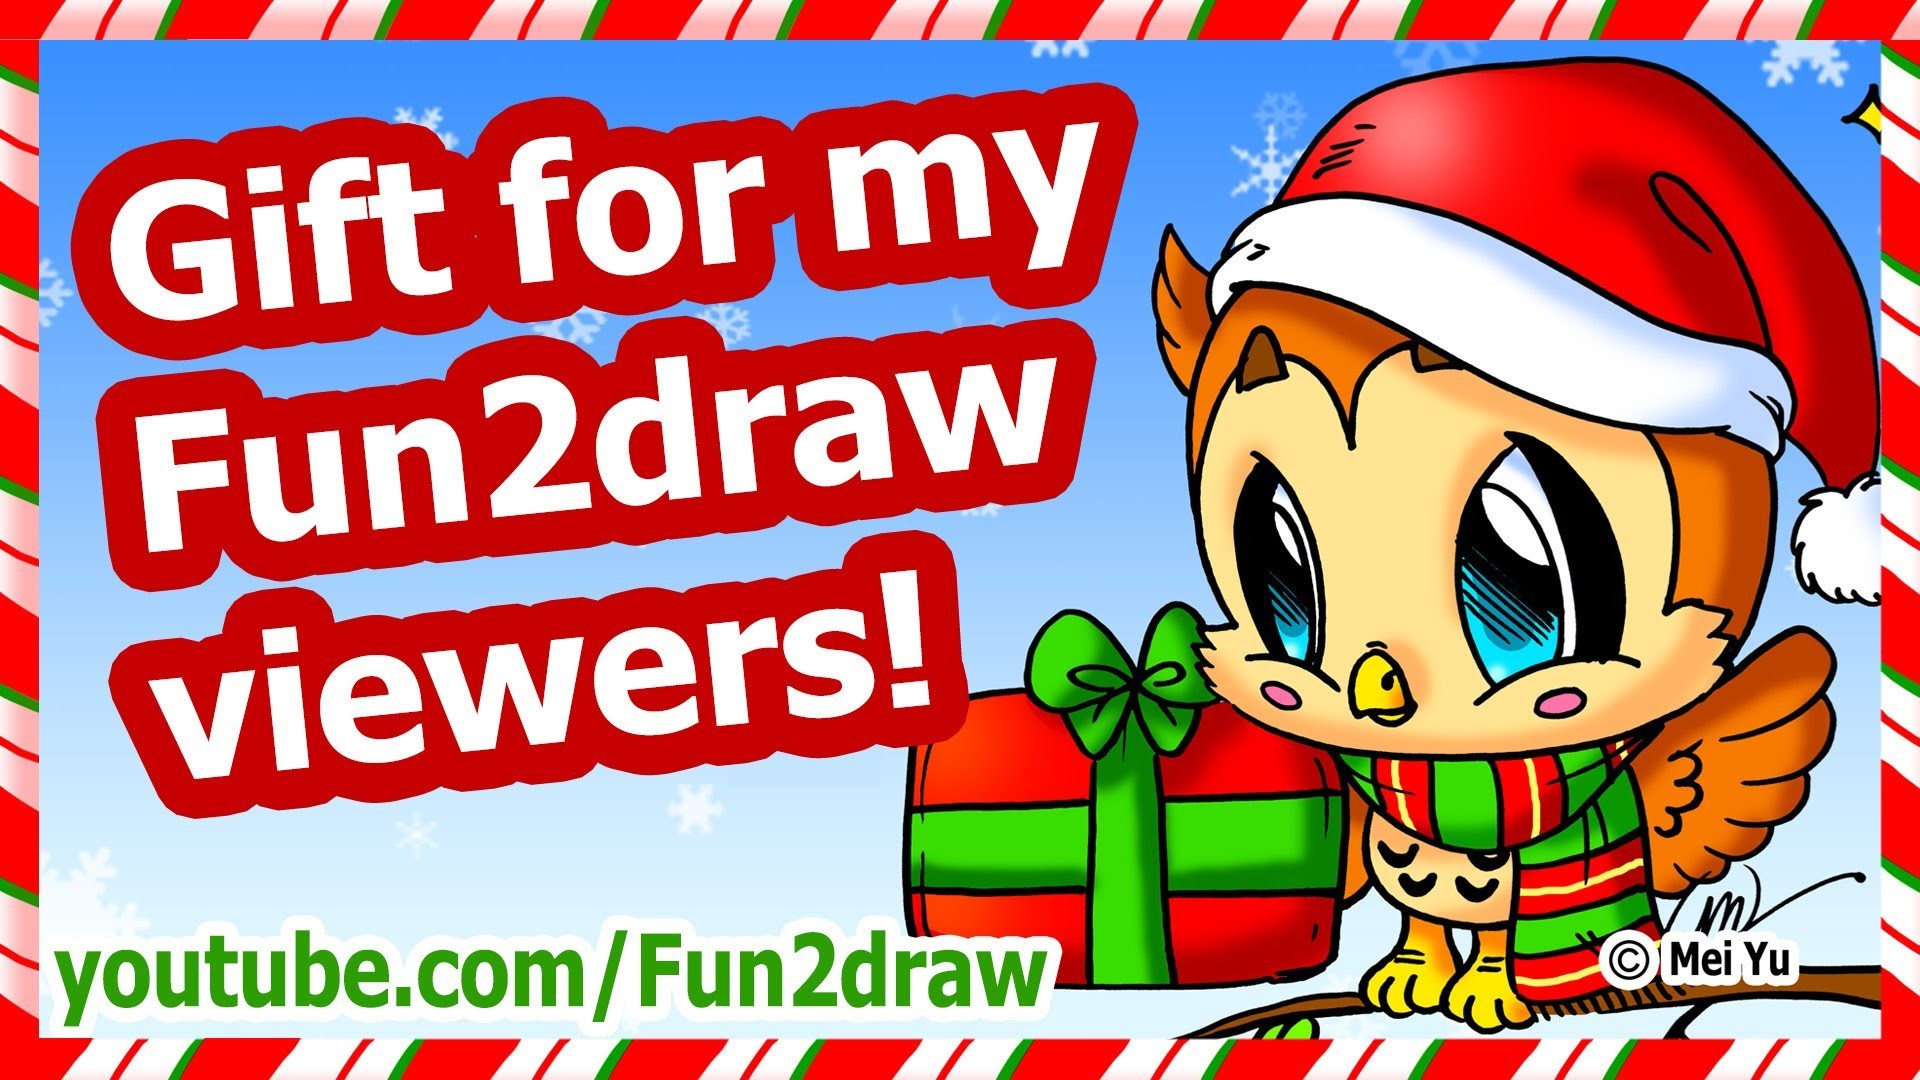 1920x1080 Christmas Gift For My Fun2draw Viewers How To Draw A Card Picture Youtube.  home design ...